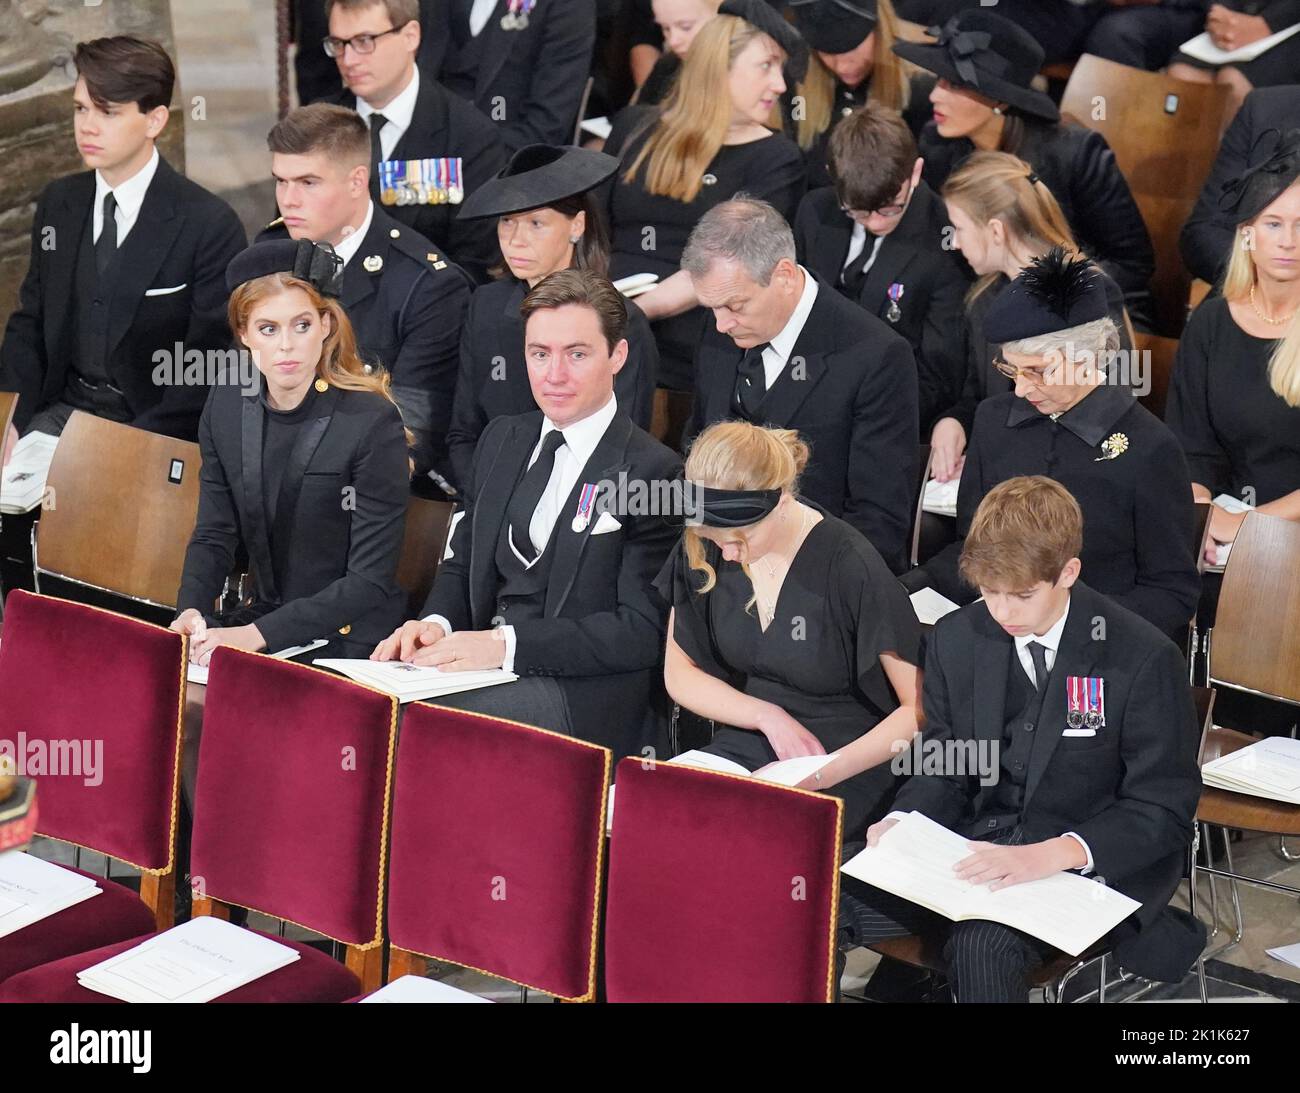 Members of the royal family (front row, left to right) Princess Beatrice, Edoardo Mapelli Mozzi, Lady Louise Windsorand James, Viscount Severn, (second row, left to right) Samuel Chatto, Arthur Chatto, Lady Sarah Chatto and Daniel Chatto, at the State Funeral of Queen Elizabeth II, held at Westminster Abbey, London. Picture date: Monday September 19, 2022. Stock Photo